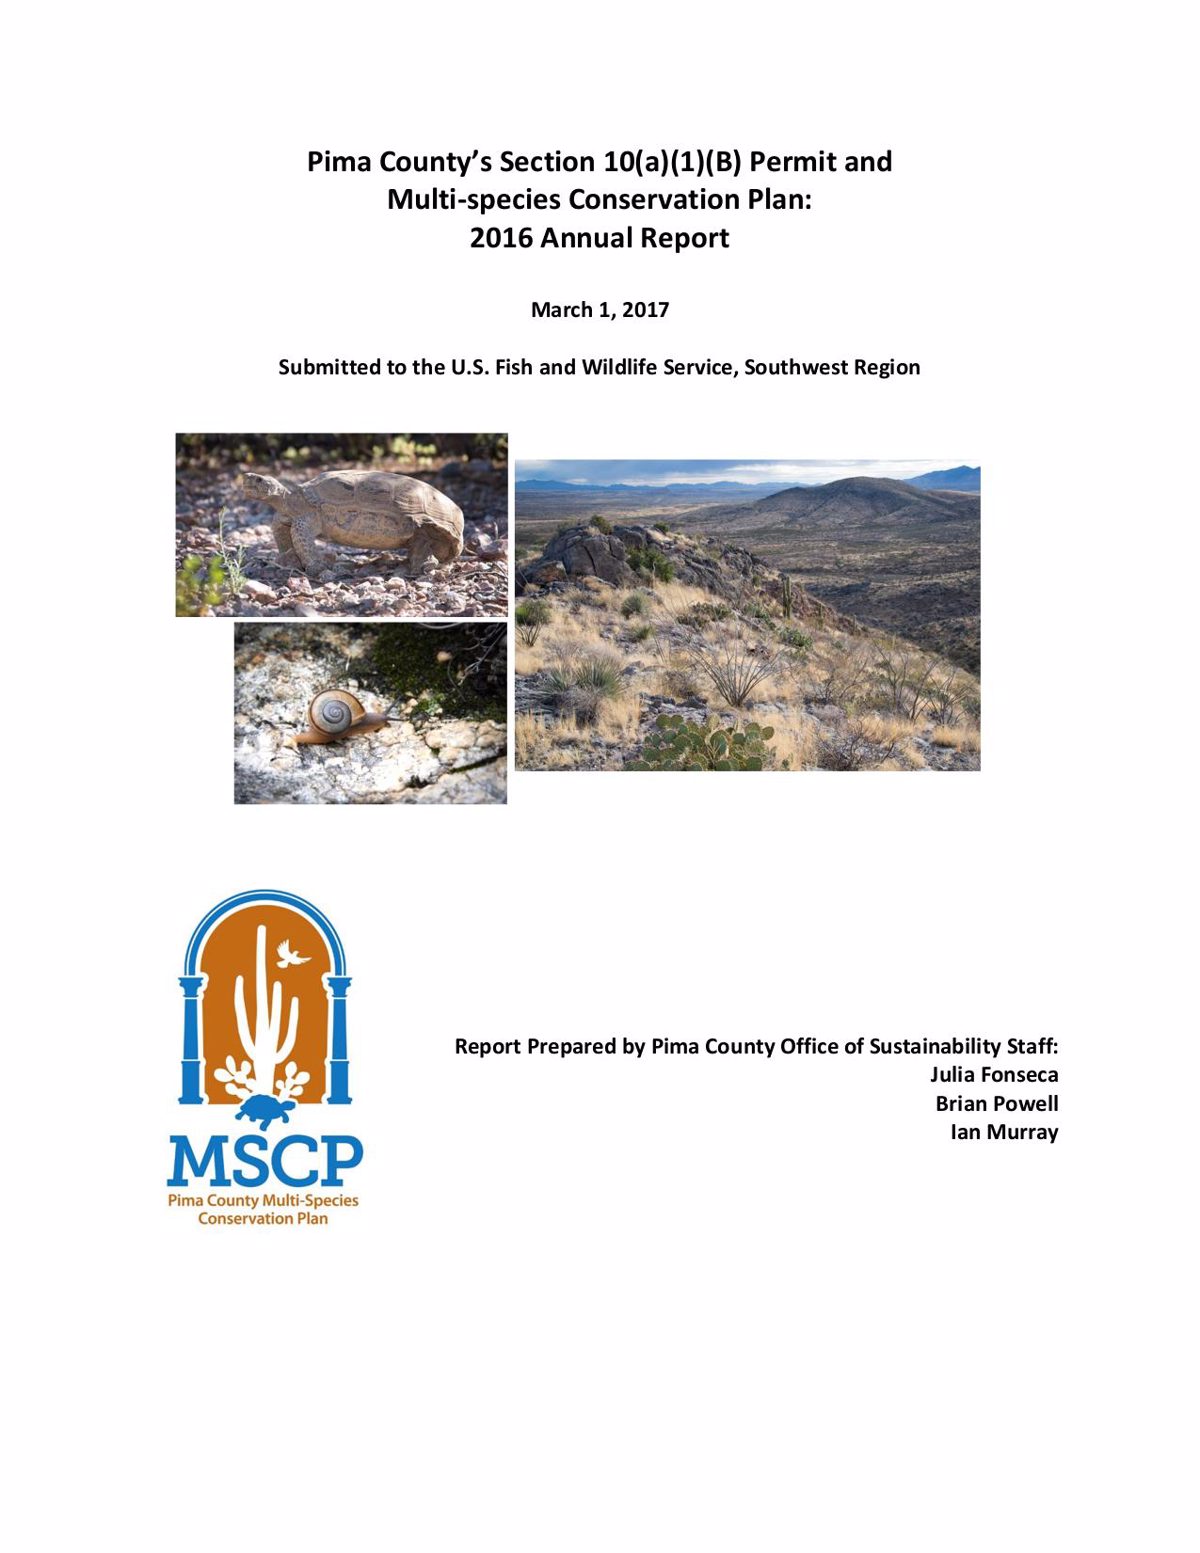 Pima County Multi-Species Conservation Plan - 2016 Annual Report Page 4